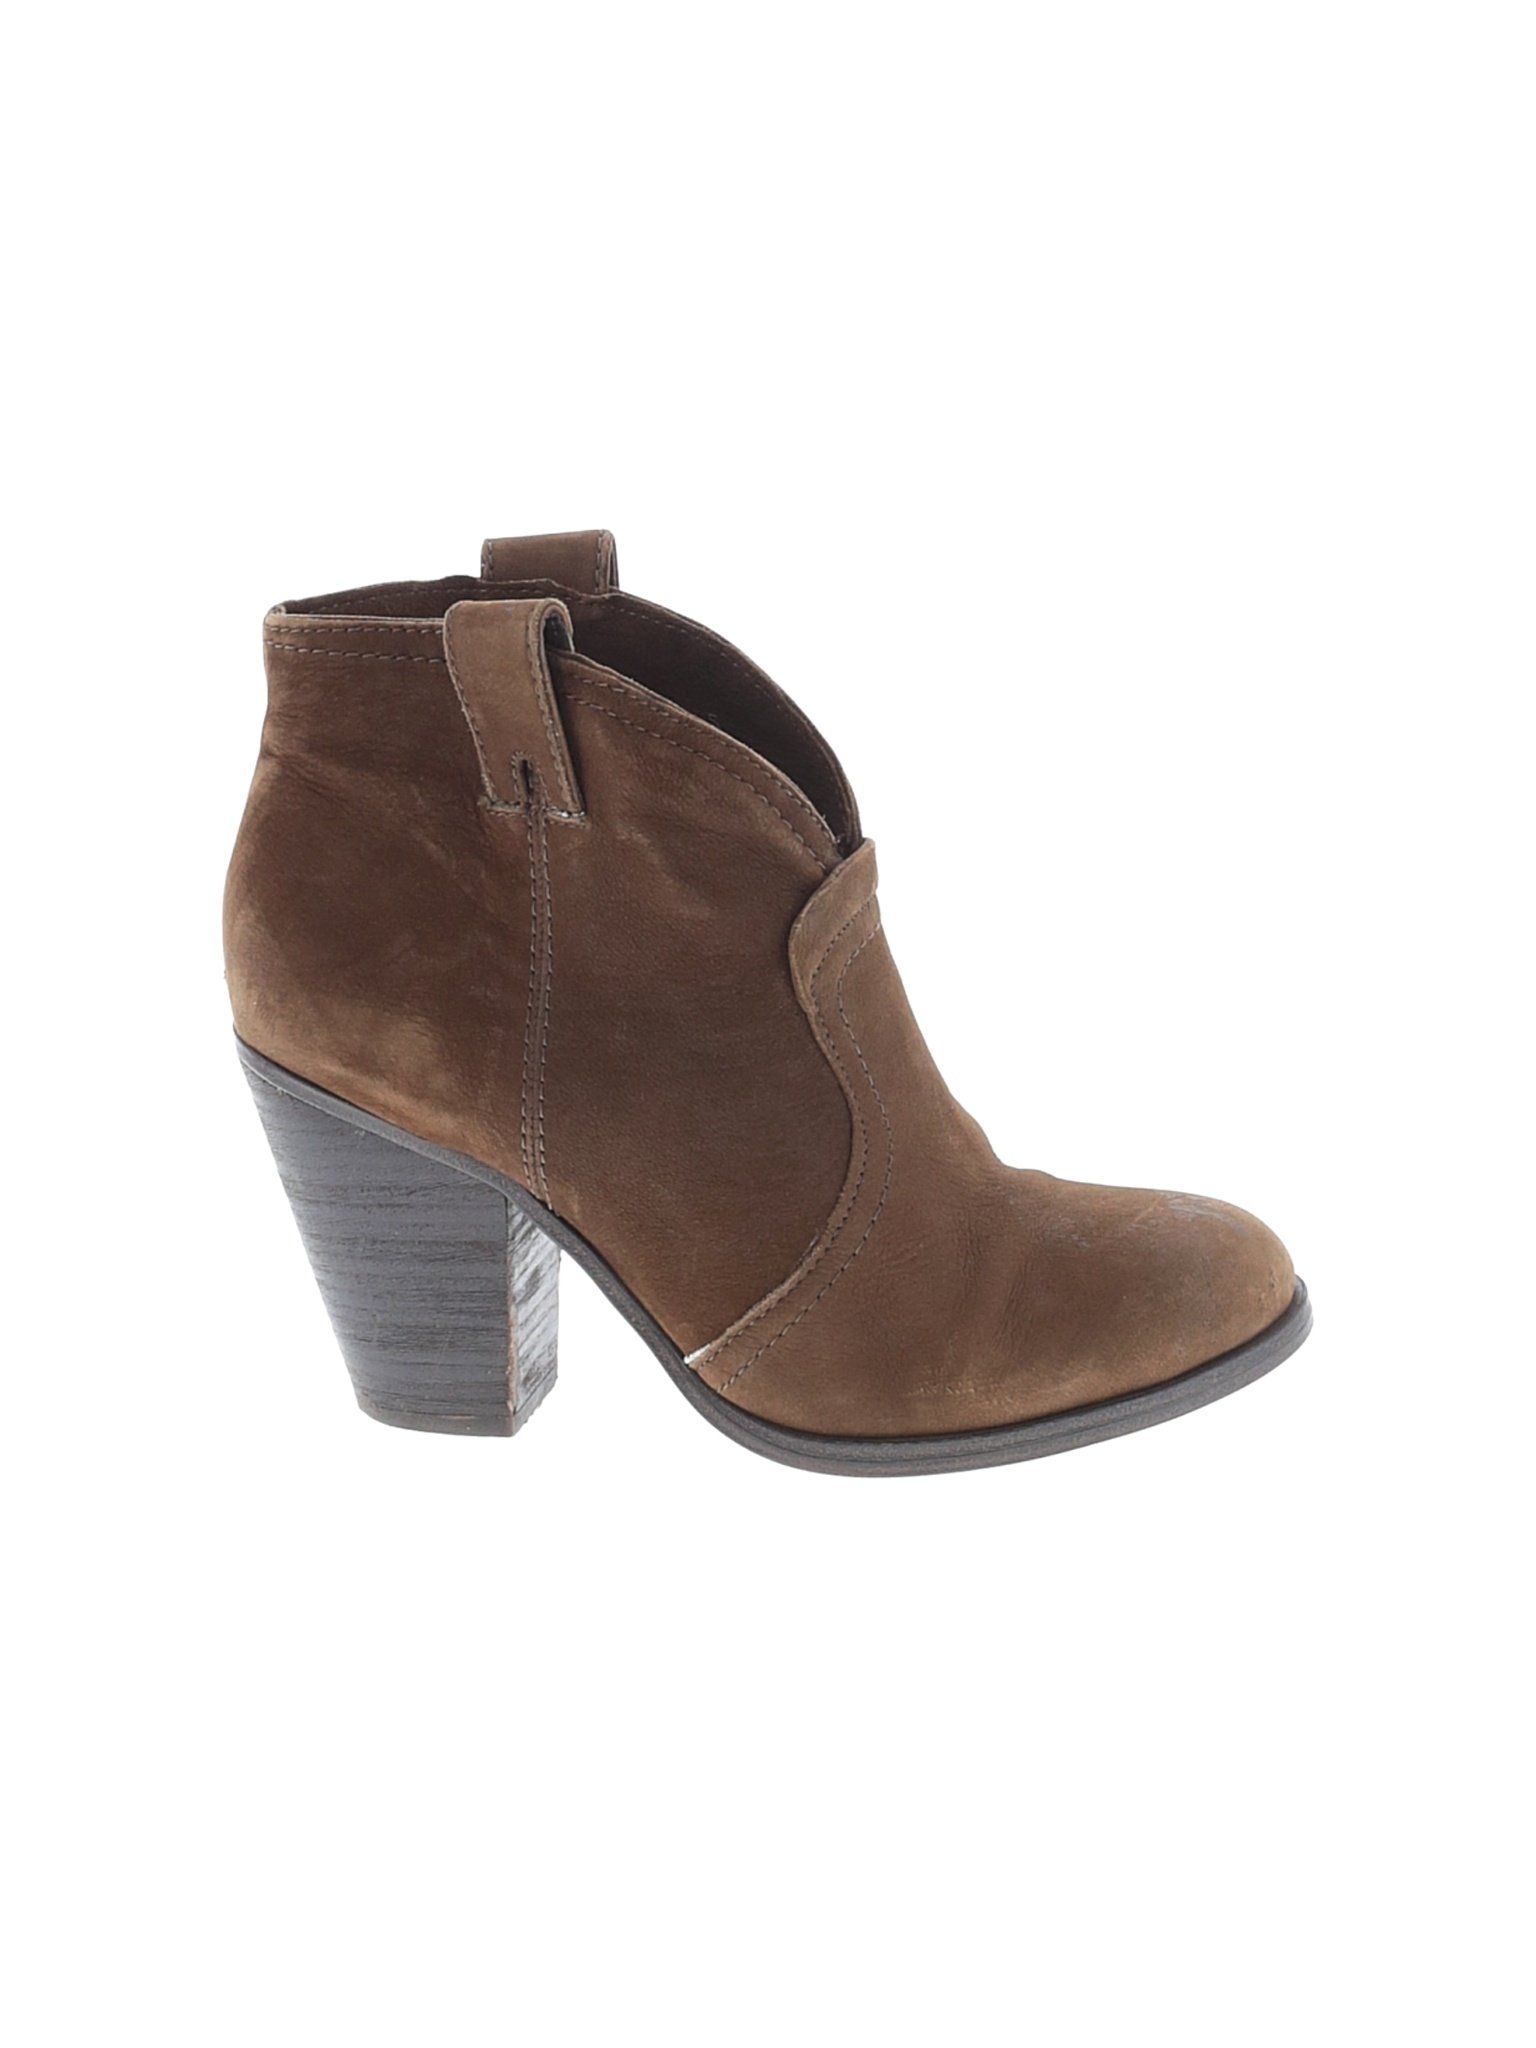 Vince Camuto Women Brown Ankle Boots US 7 | eBay